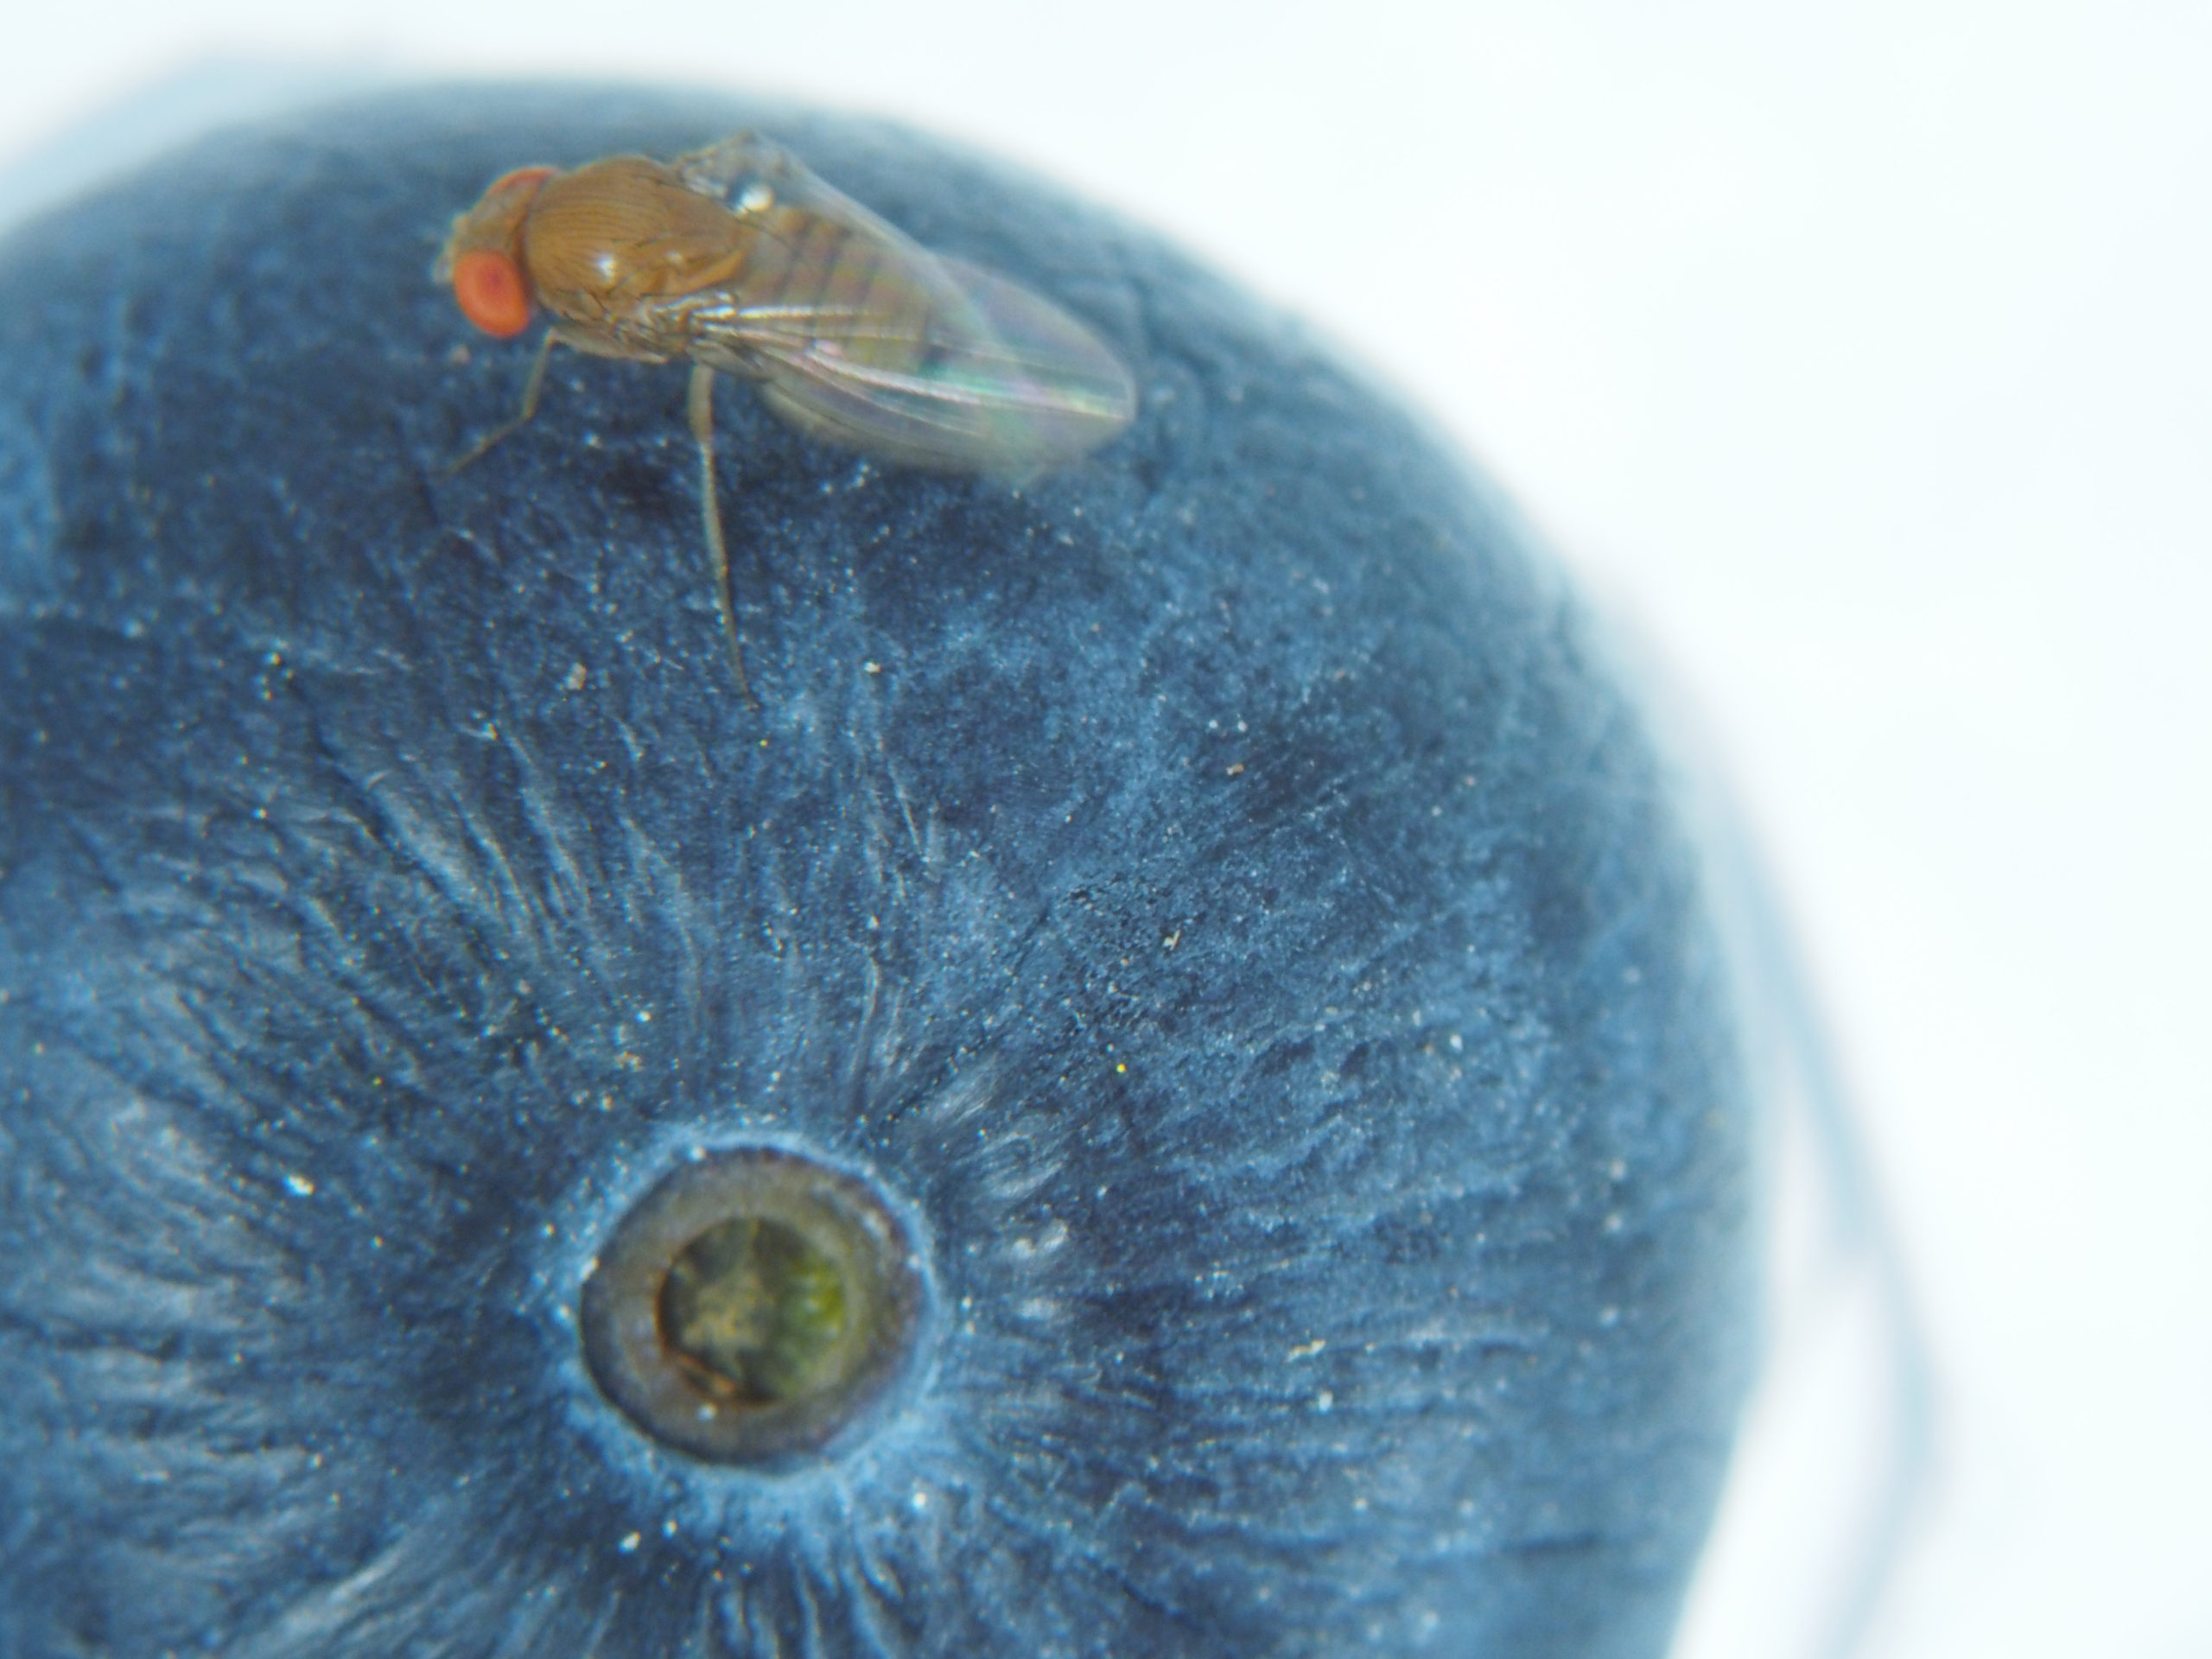 Featured image for “Management Update for Spotted-Wing Drosophila”